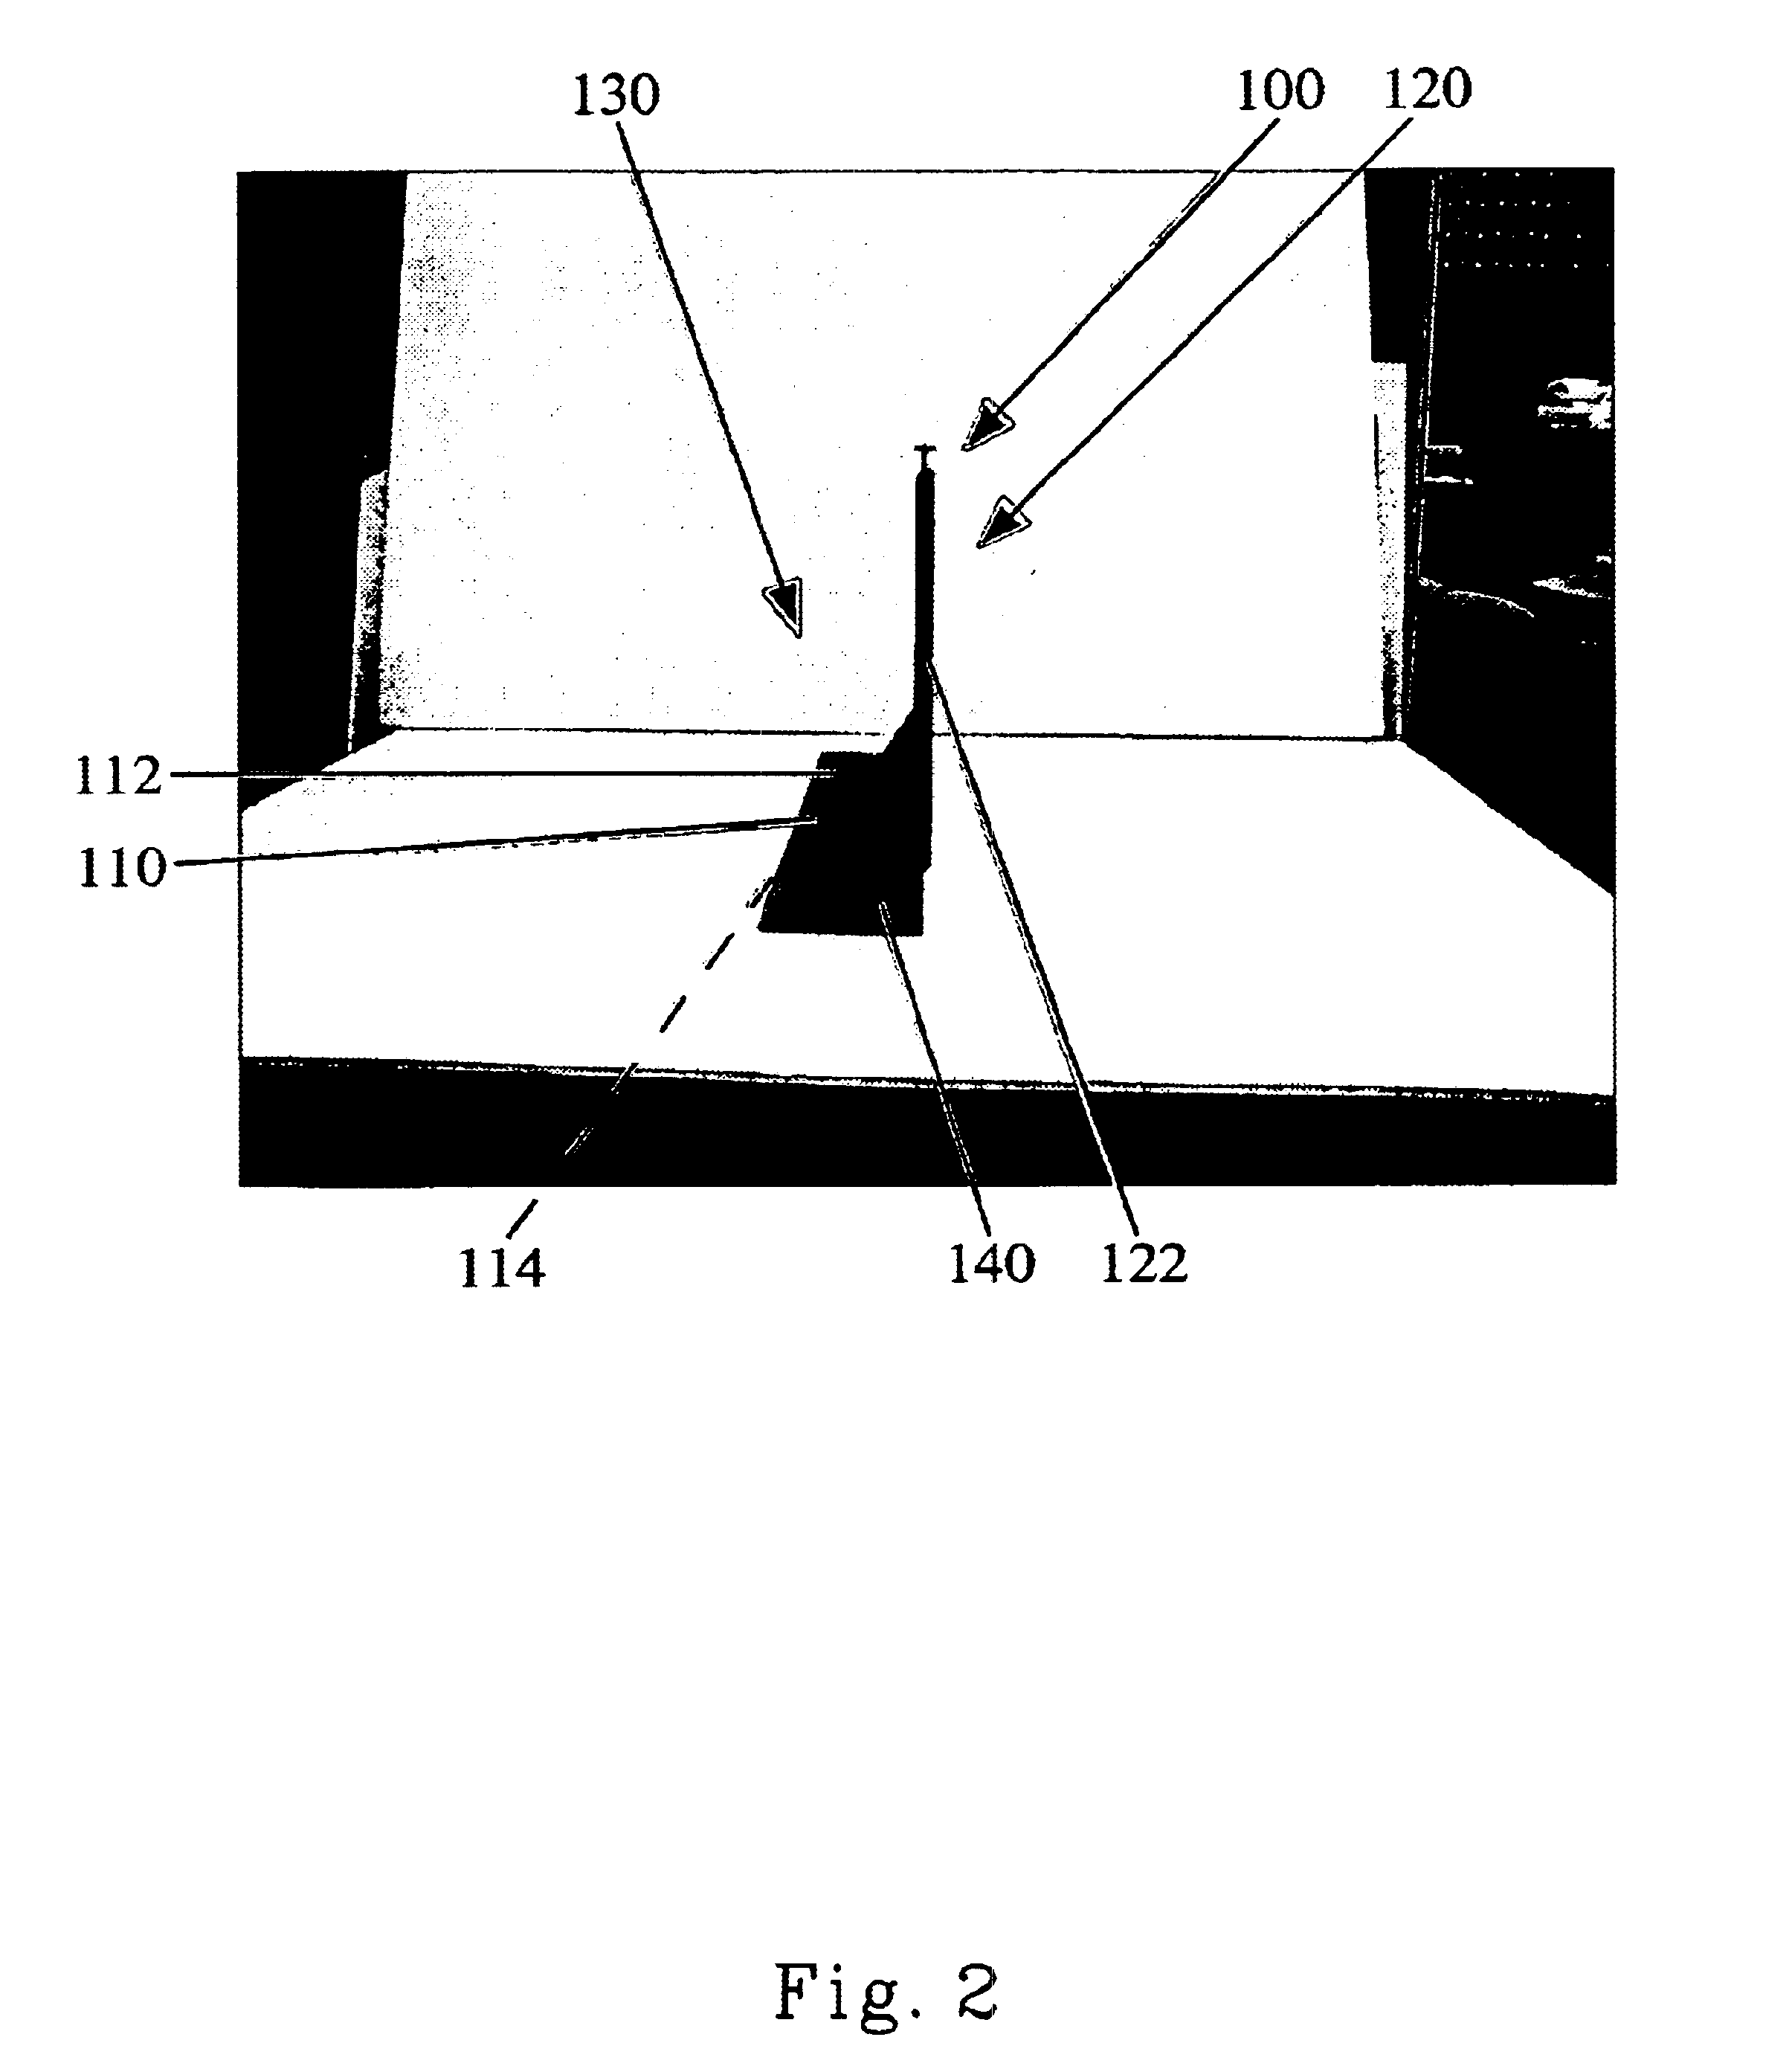 Shelf tray apparatus for absorbent articles packaged in flexible film